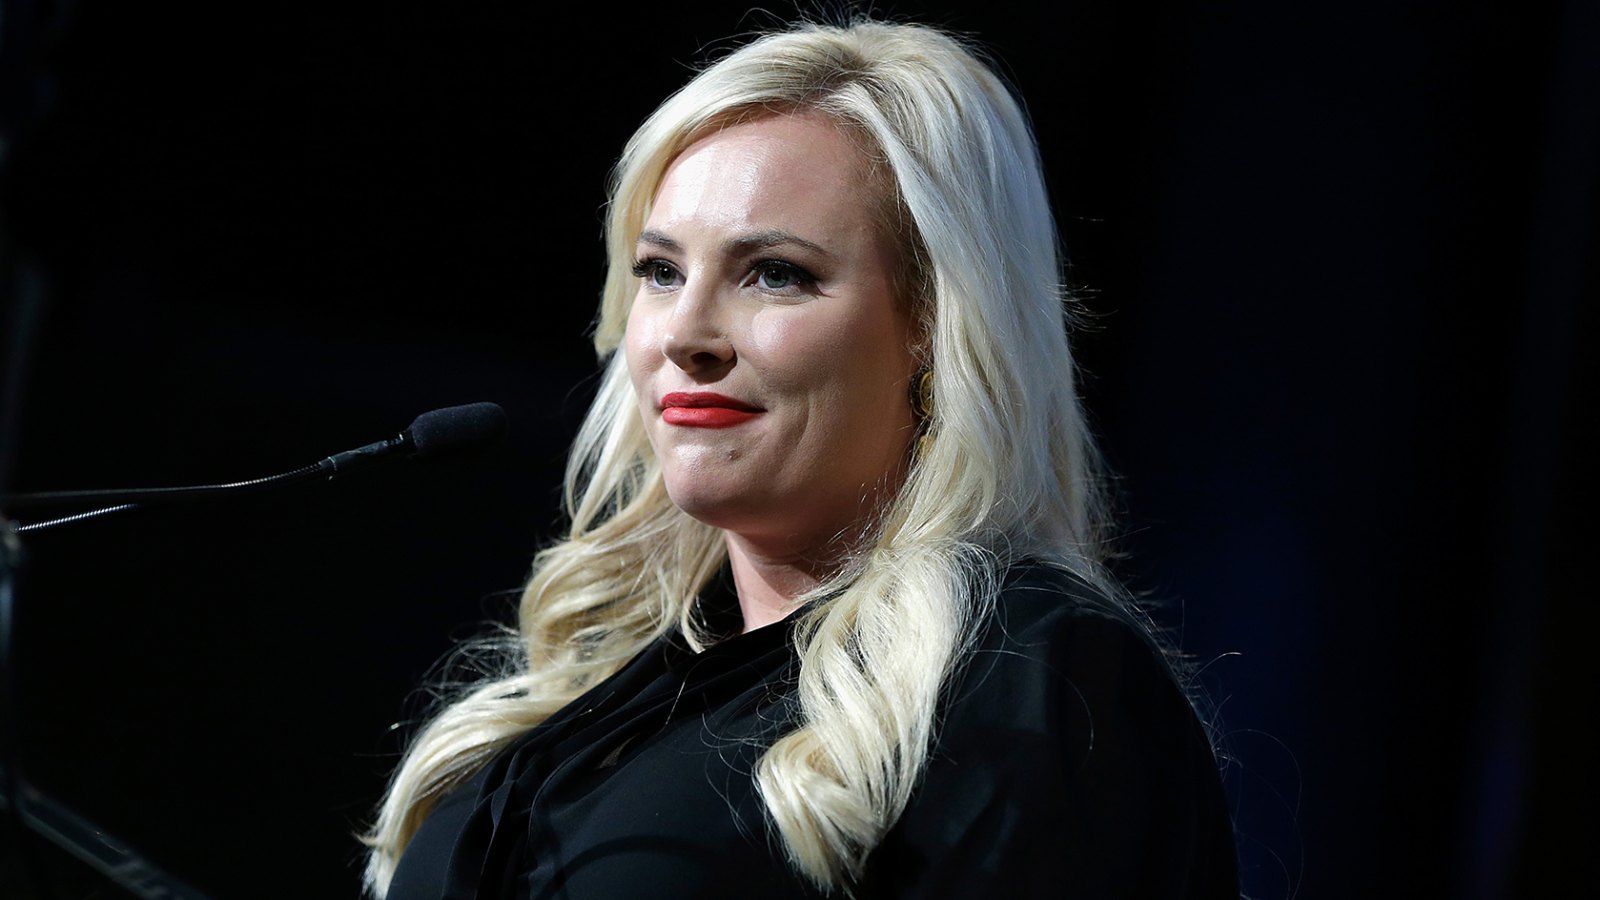 Meghan McCain Is Returning to ‘The View’ After the Death of Her Father John McCain